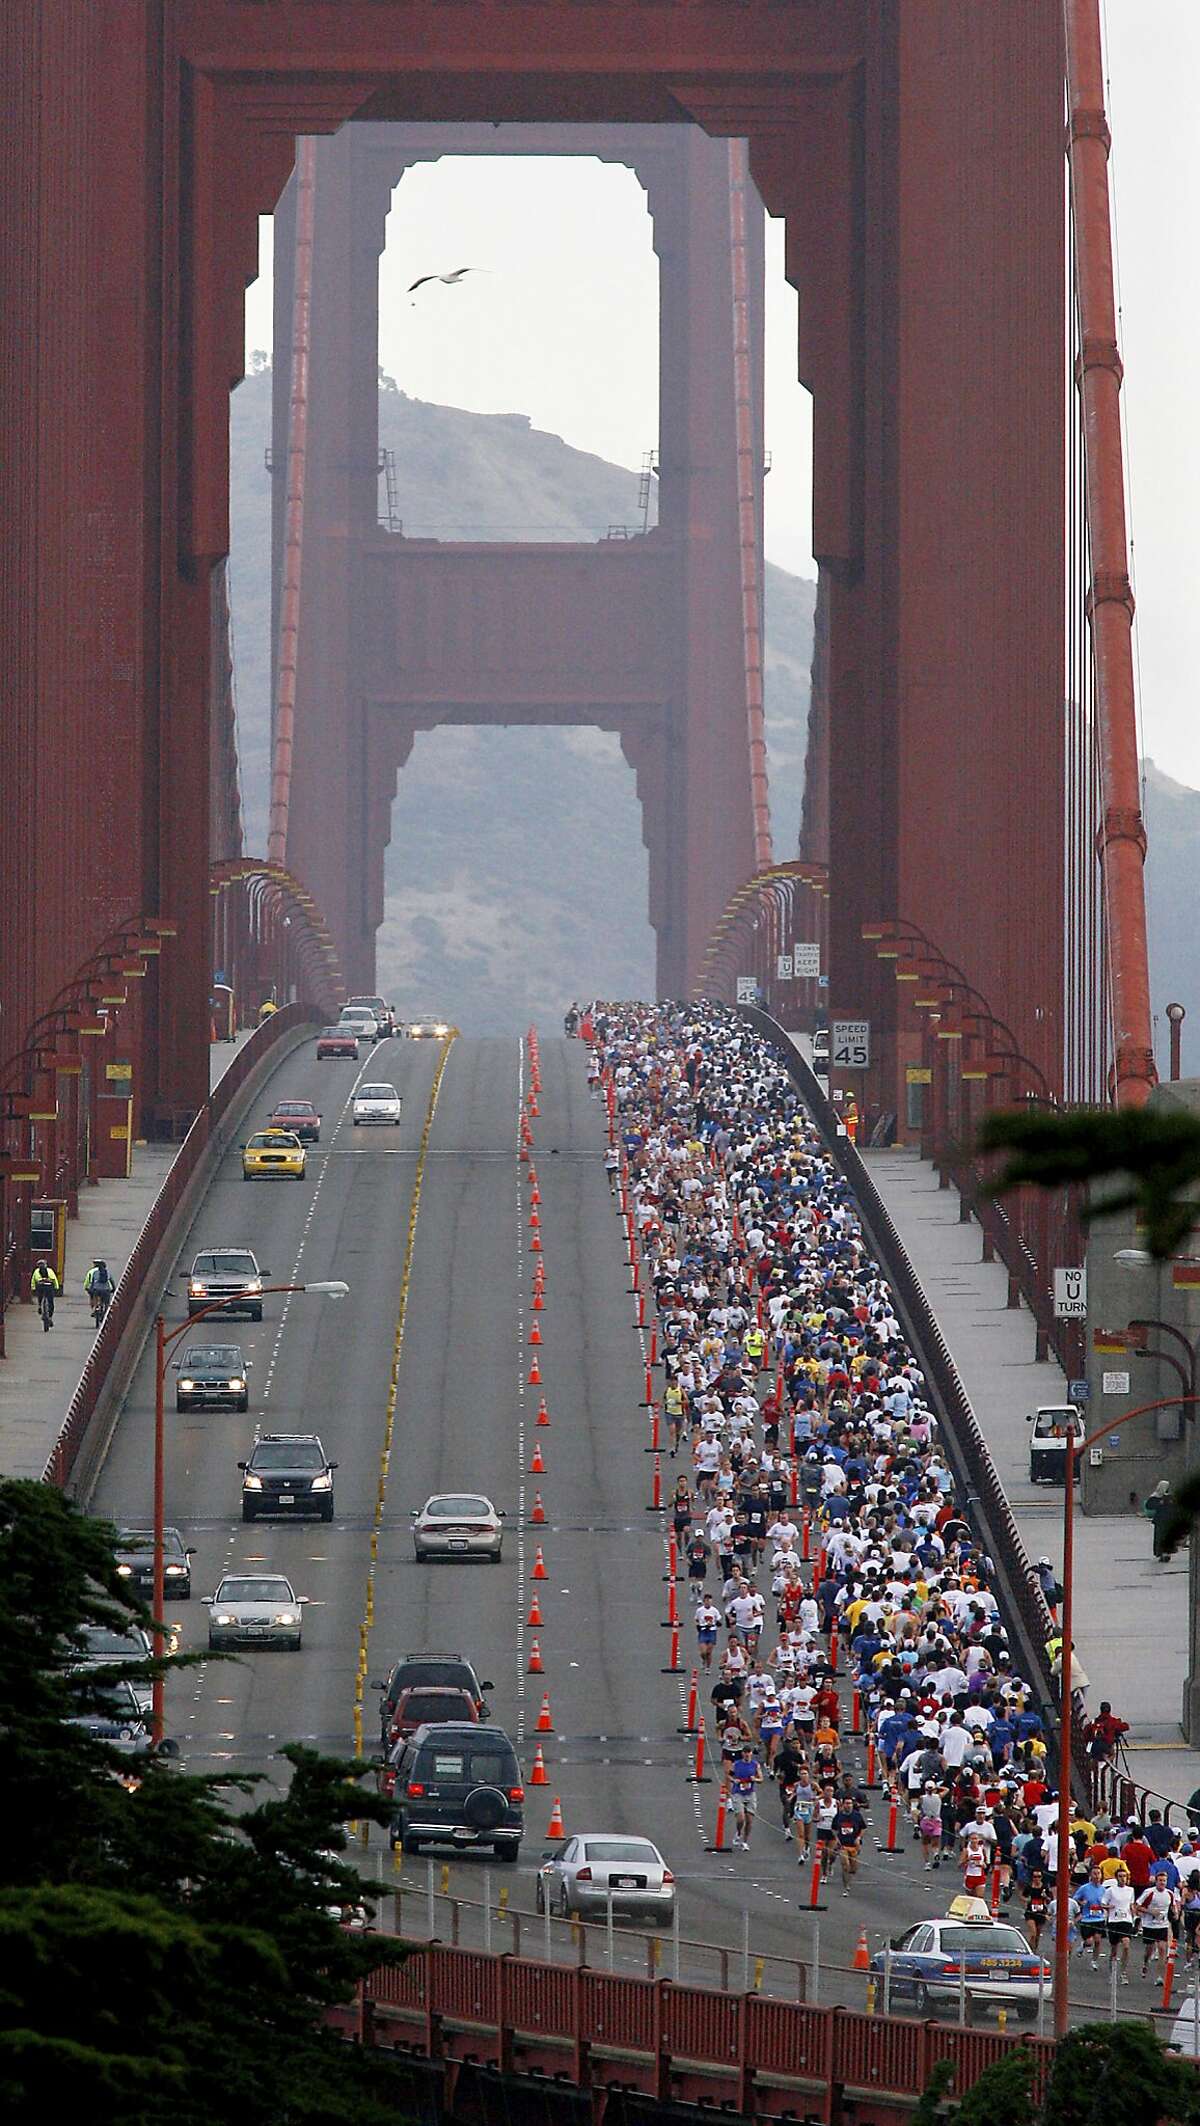 FILE - In this July 30, 2006 file photo, San Francisco marathon runners cross the Golden Gate Bridge. For the first time, northbound lanes of the Golden Gate Bridge will be closed during the San Francisco Marathon due to terrorism concerns. Bridge operators decided to keep motorists out of those lanes in this year's marathon between 6 to 9 a.m. Sunday, July 23, 2017, after several terrorist attacks occurred where drivers intentionally plowed into pedestrians. Southbound lanes will be kept open because runners are protected from southbound vehicles by a steel-and-concrete median barrier. (Brant Ward/San Francisco Chronicle via AP, File)